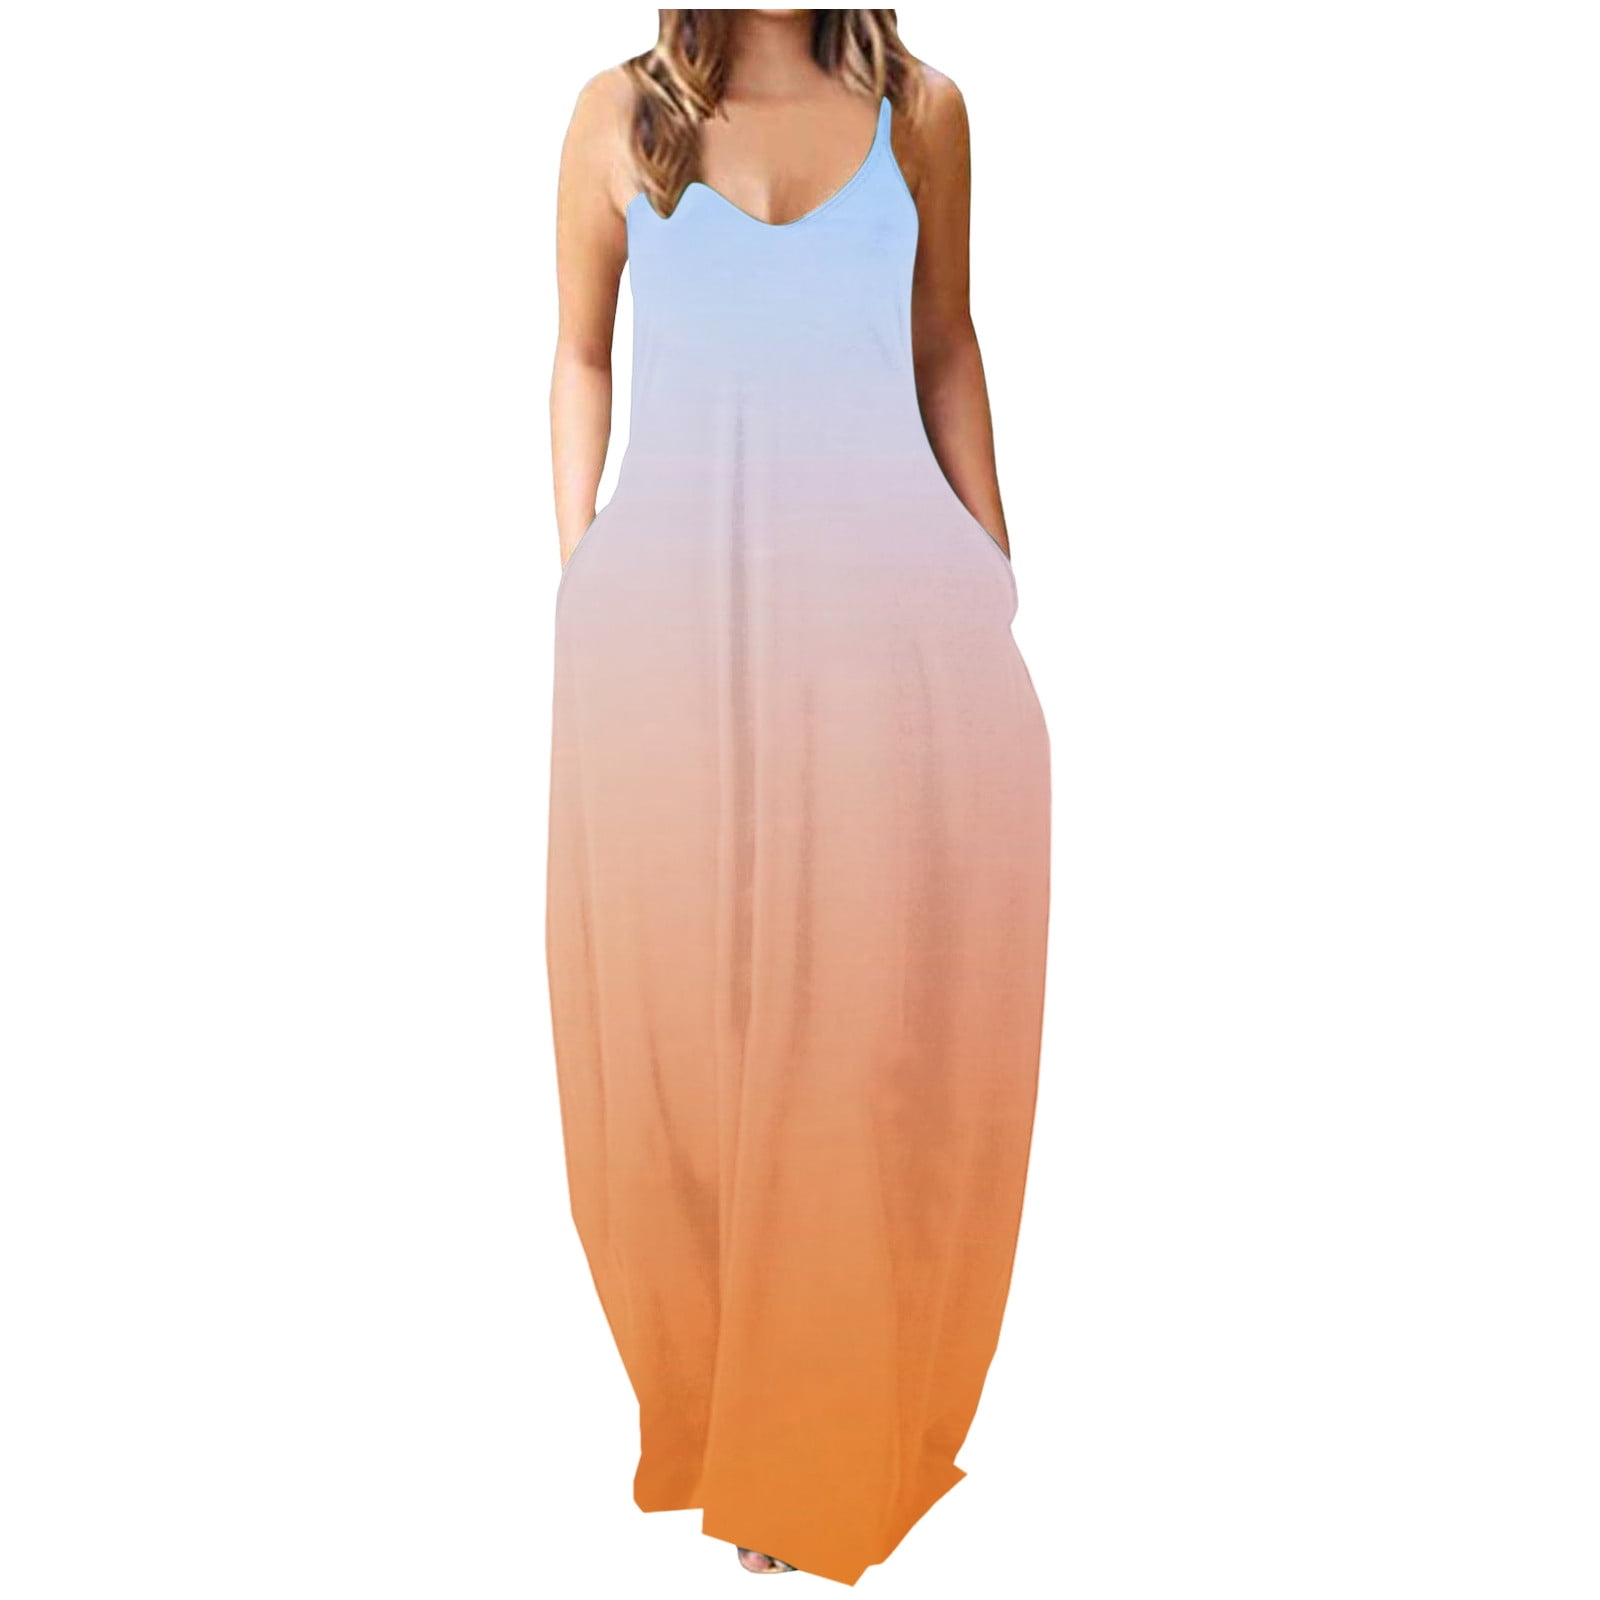 Long Maxi Dress for Women, Summer Sun Dresses with Pockets Spaghetti Strap  Sleeveless Floral Casual Wedding Guest Dresses # Flash Sales Today Deals